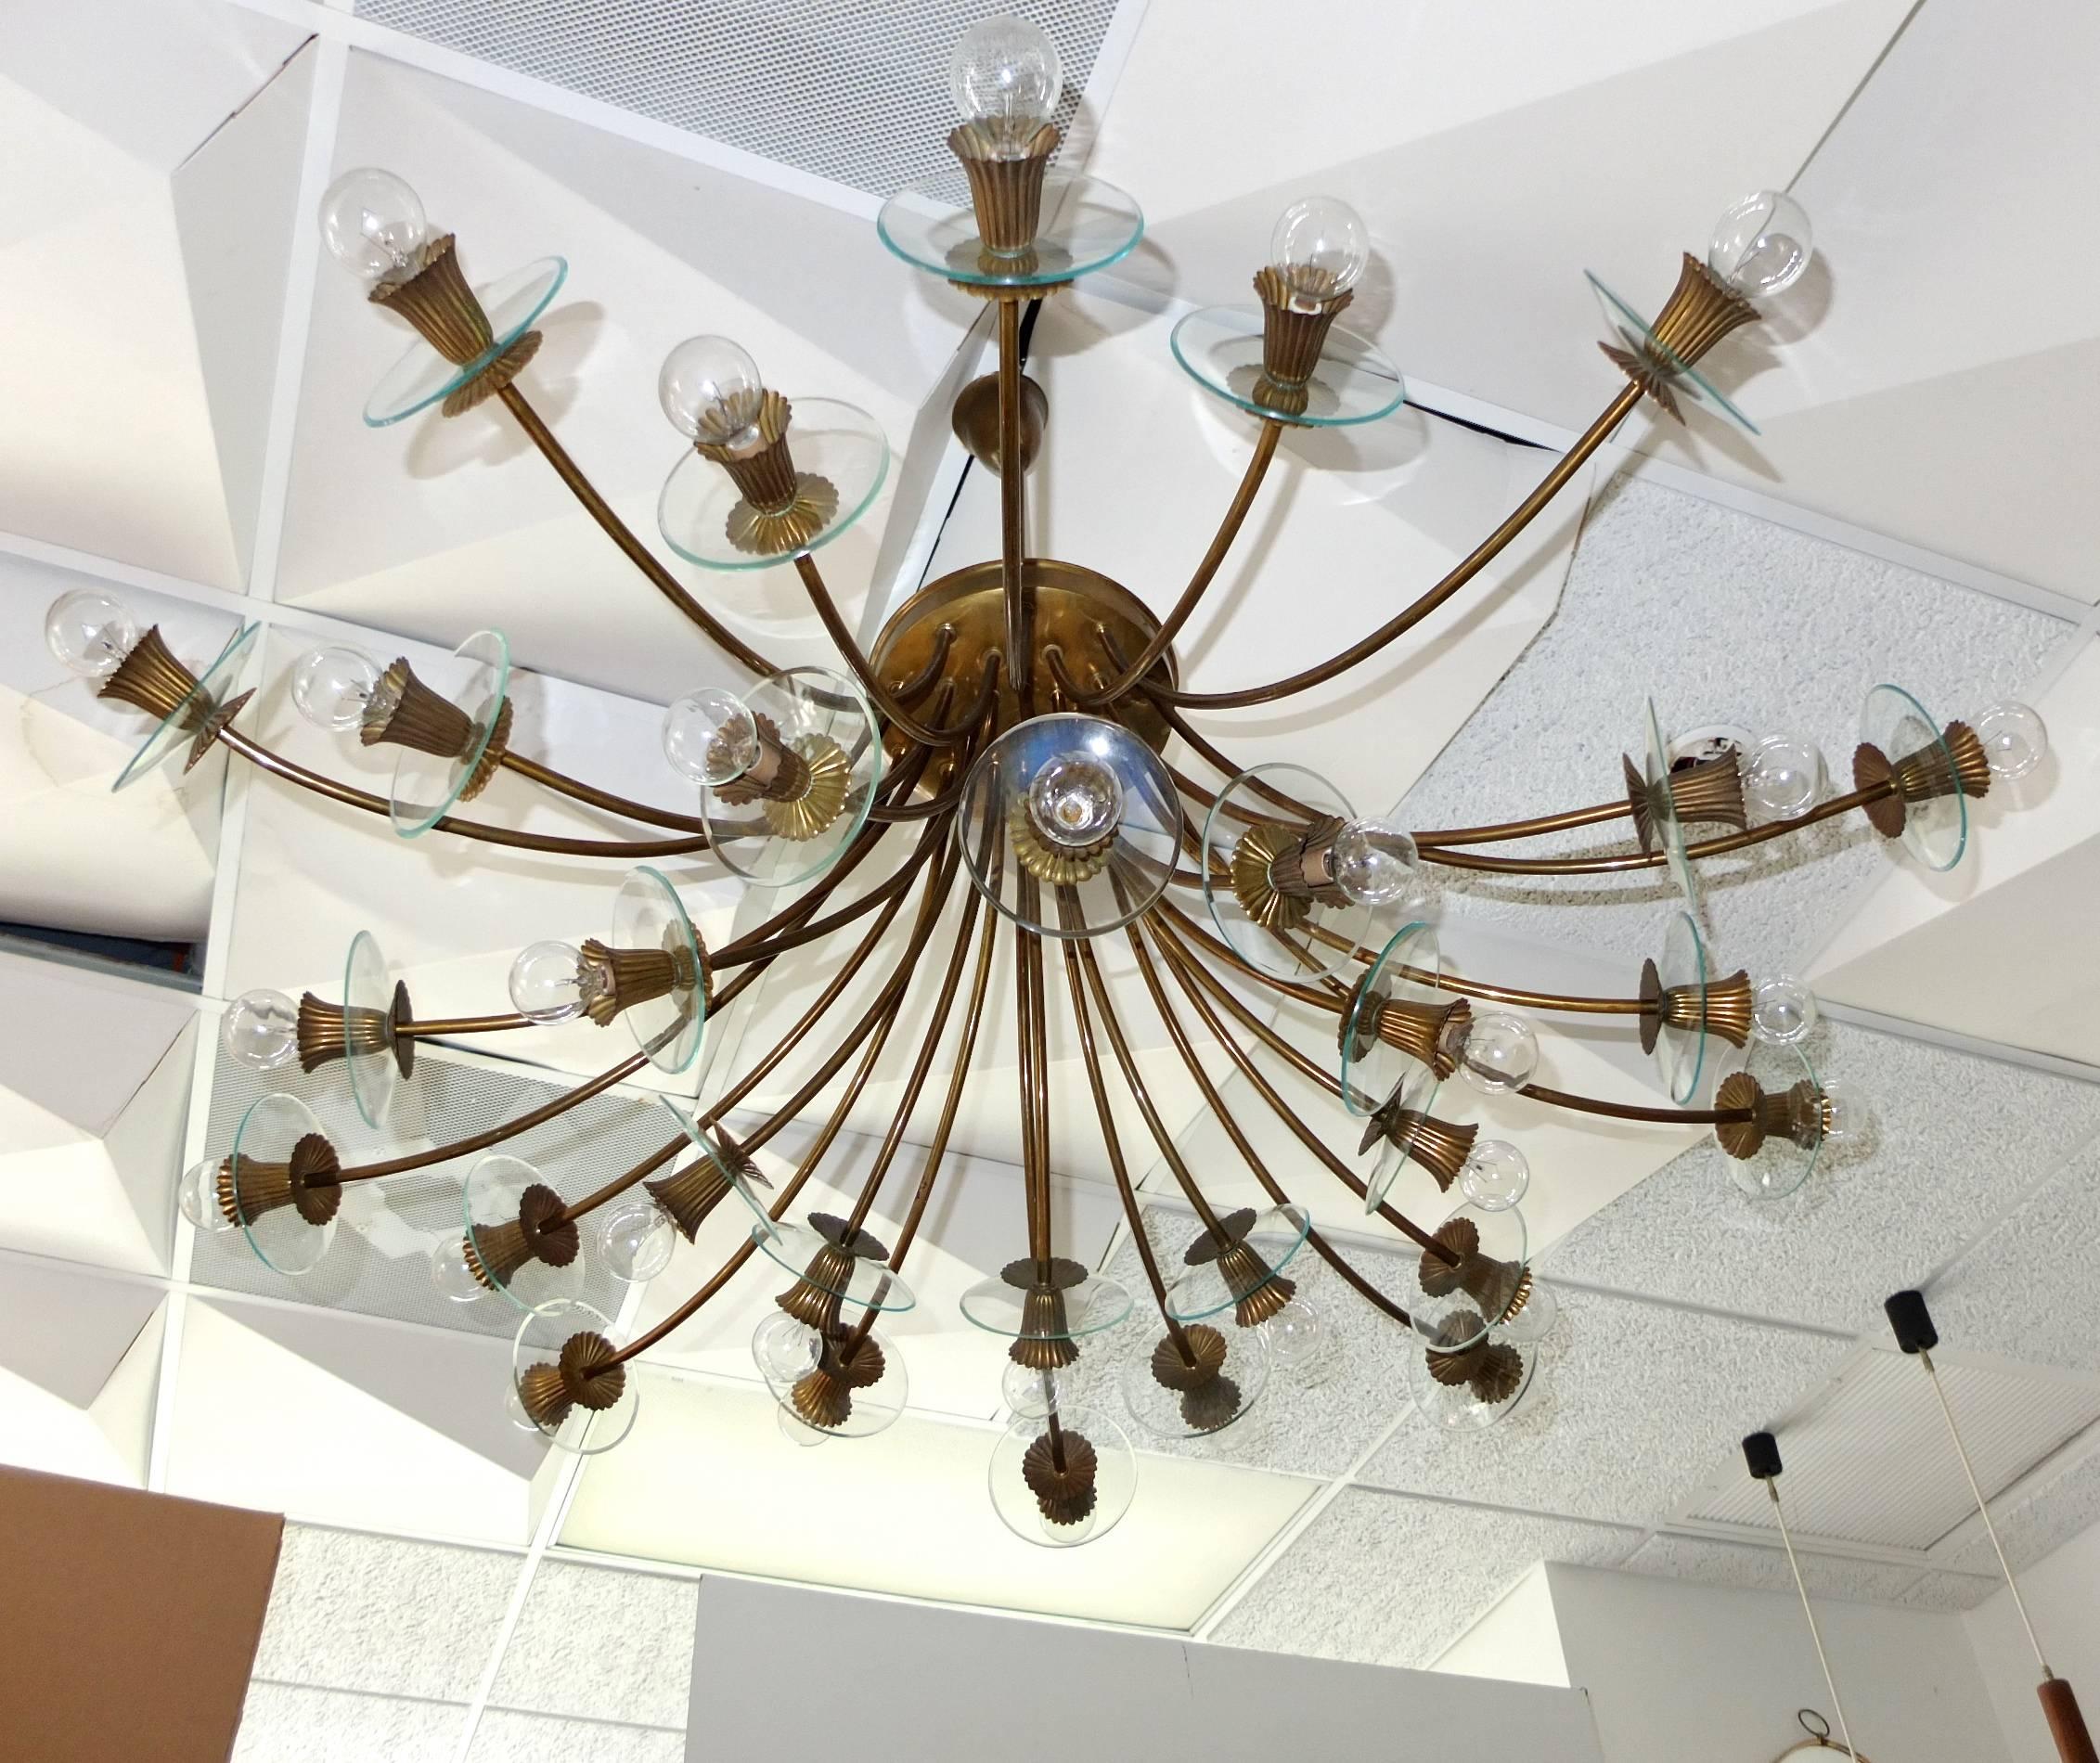 Monumental scale chandelier or ceiling flush mount light fixture made in Italy, circa 1940 in the style of Pietro Chiesa's inverted bouquet for Fontana Arte, 1938. 

Thirty curved bronze finished tubular stem-like arms, three sets of ten of three